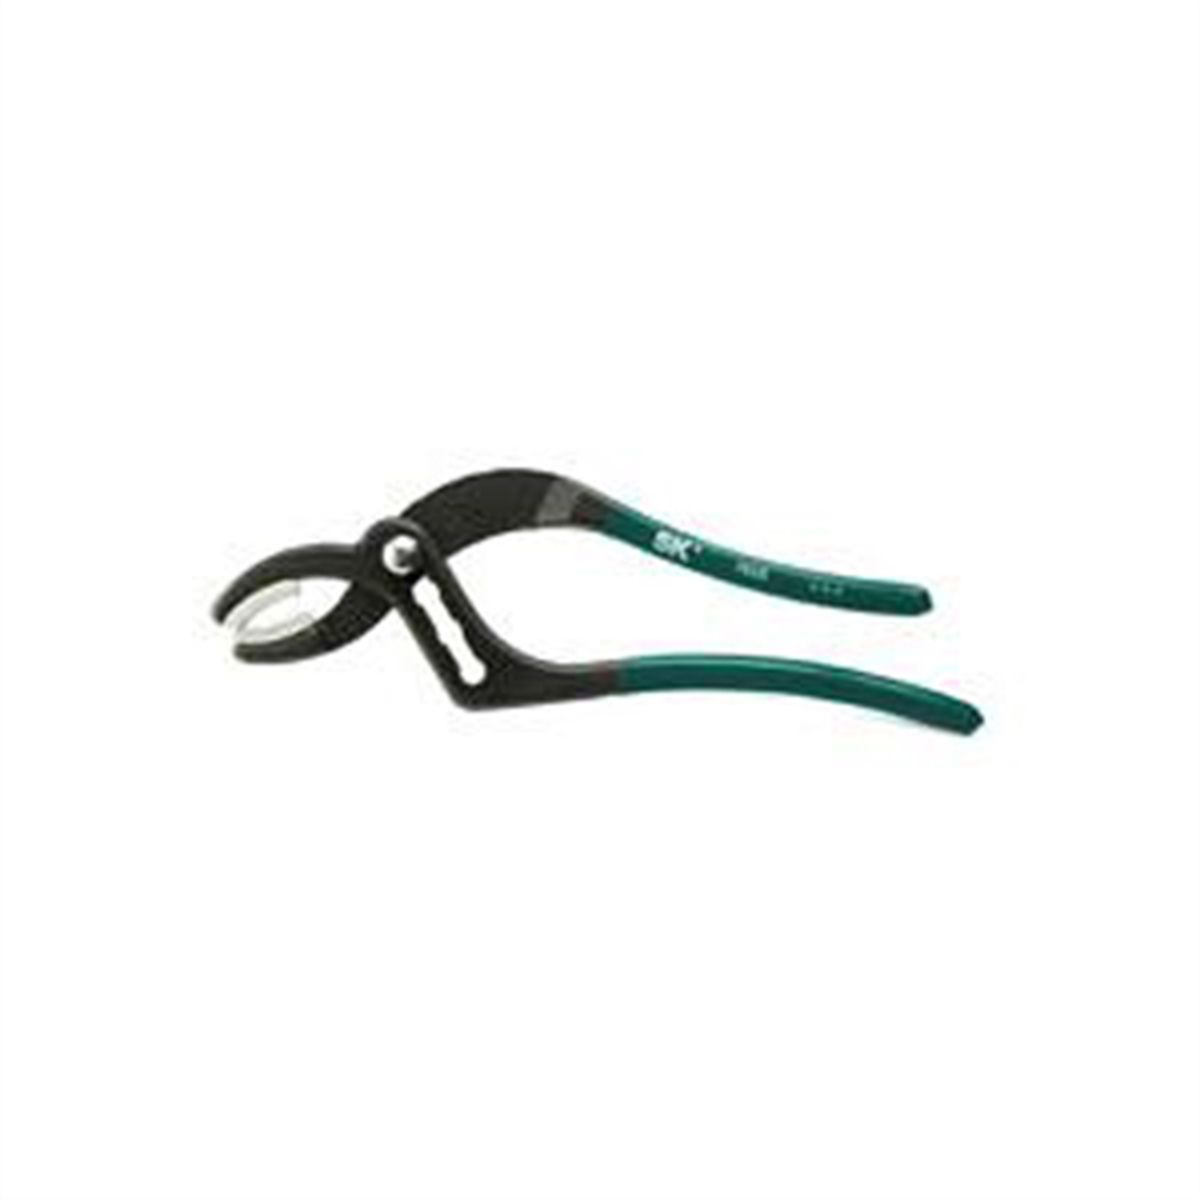 Soft Jaw Cannon Plug Plier - 3/4 to 2-1/2 In Capacity